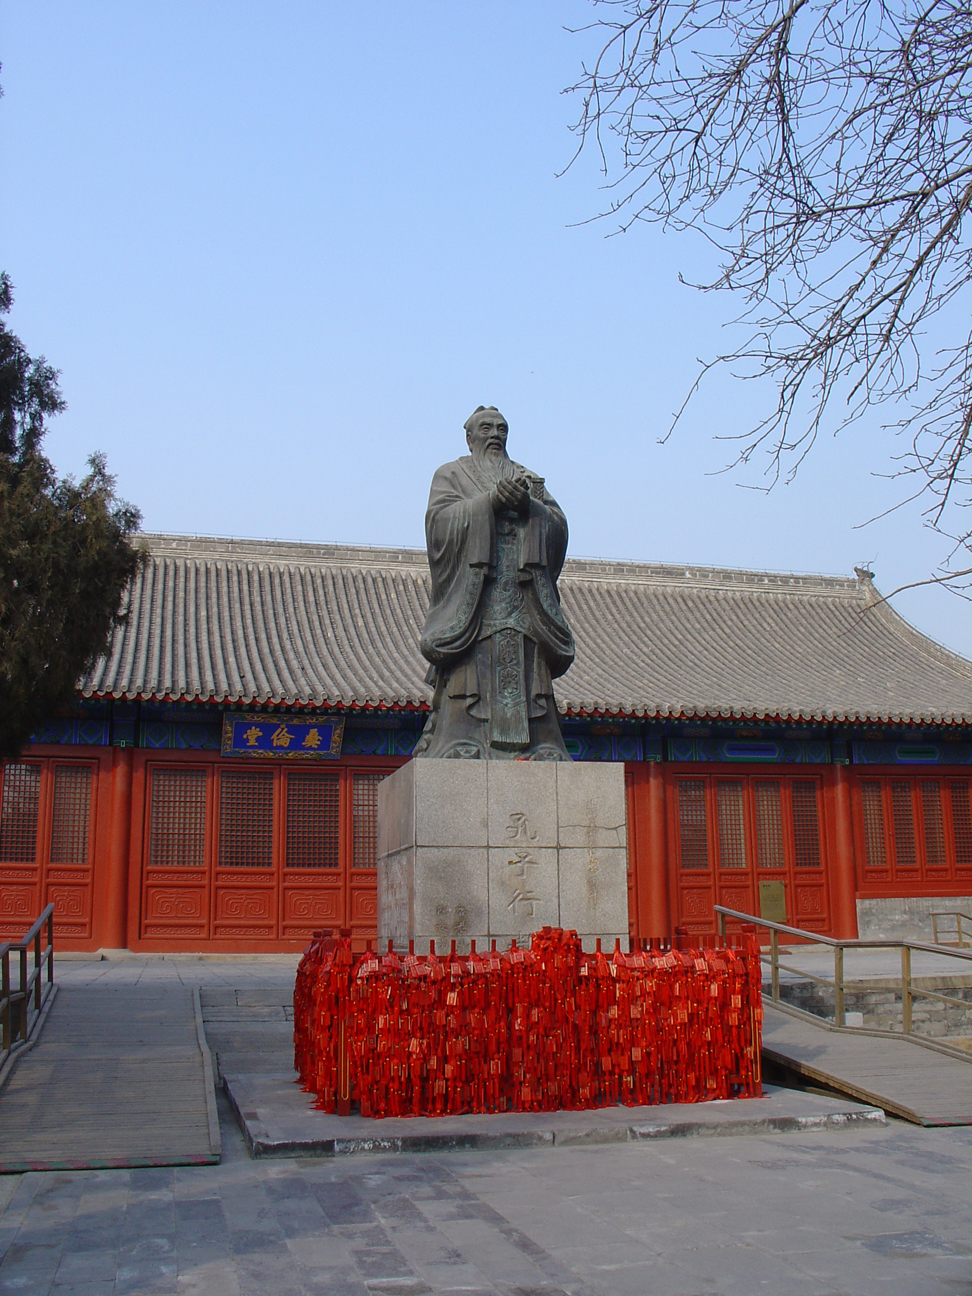 A statue of Confucius surrounded by charms